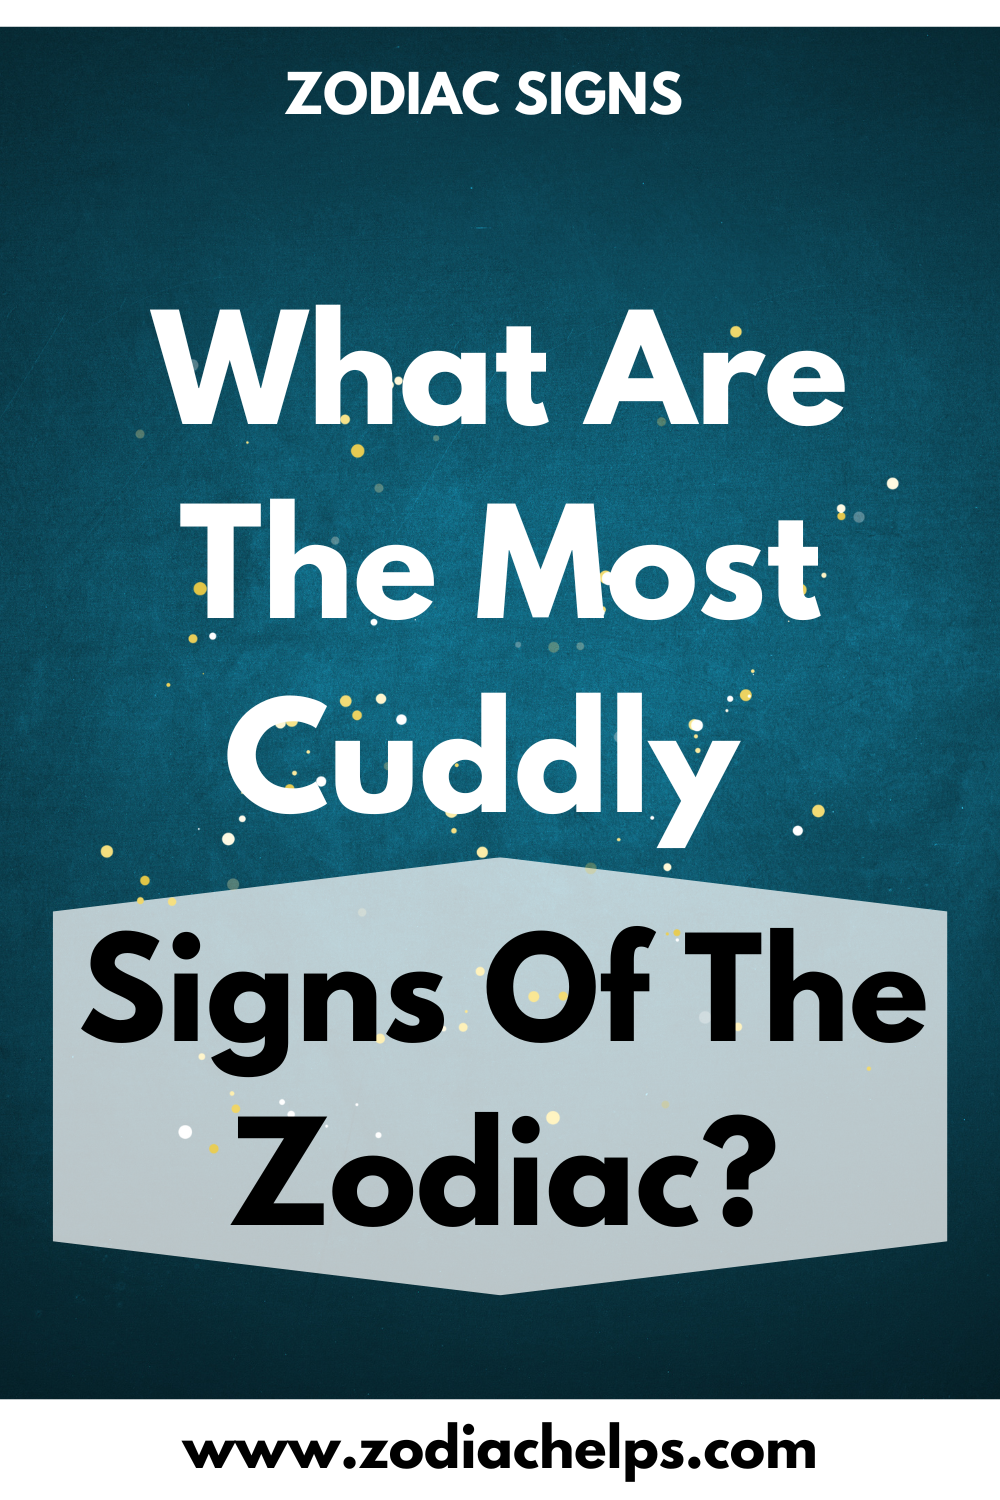 What Are The Most Cuddly Signs Of The Zodiac?